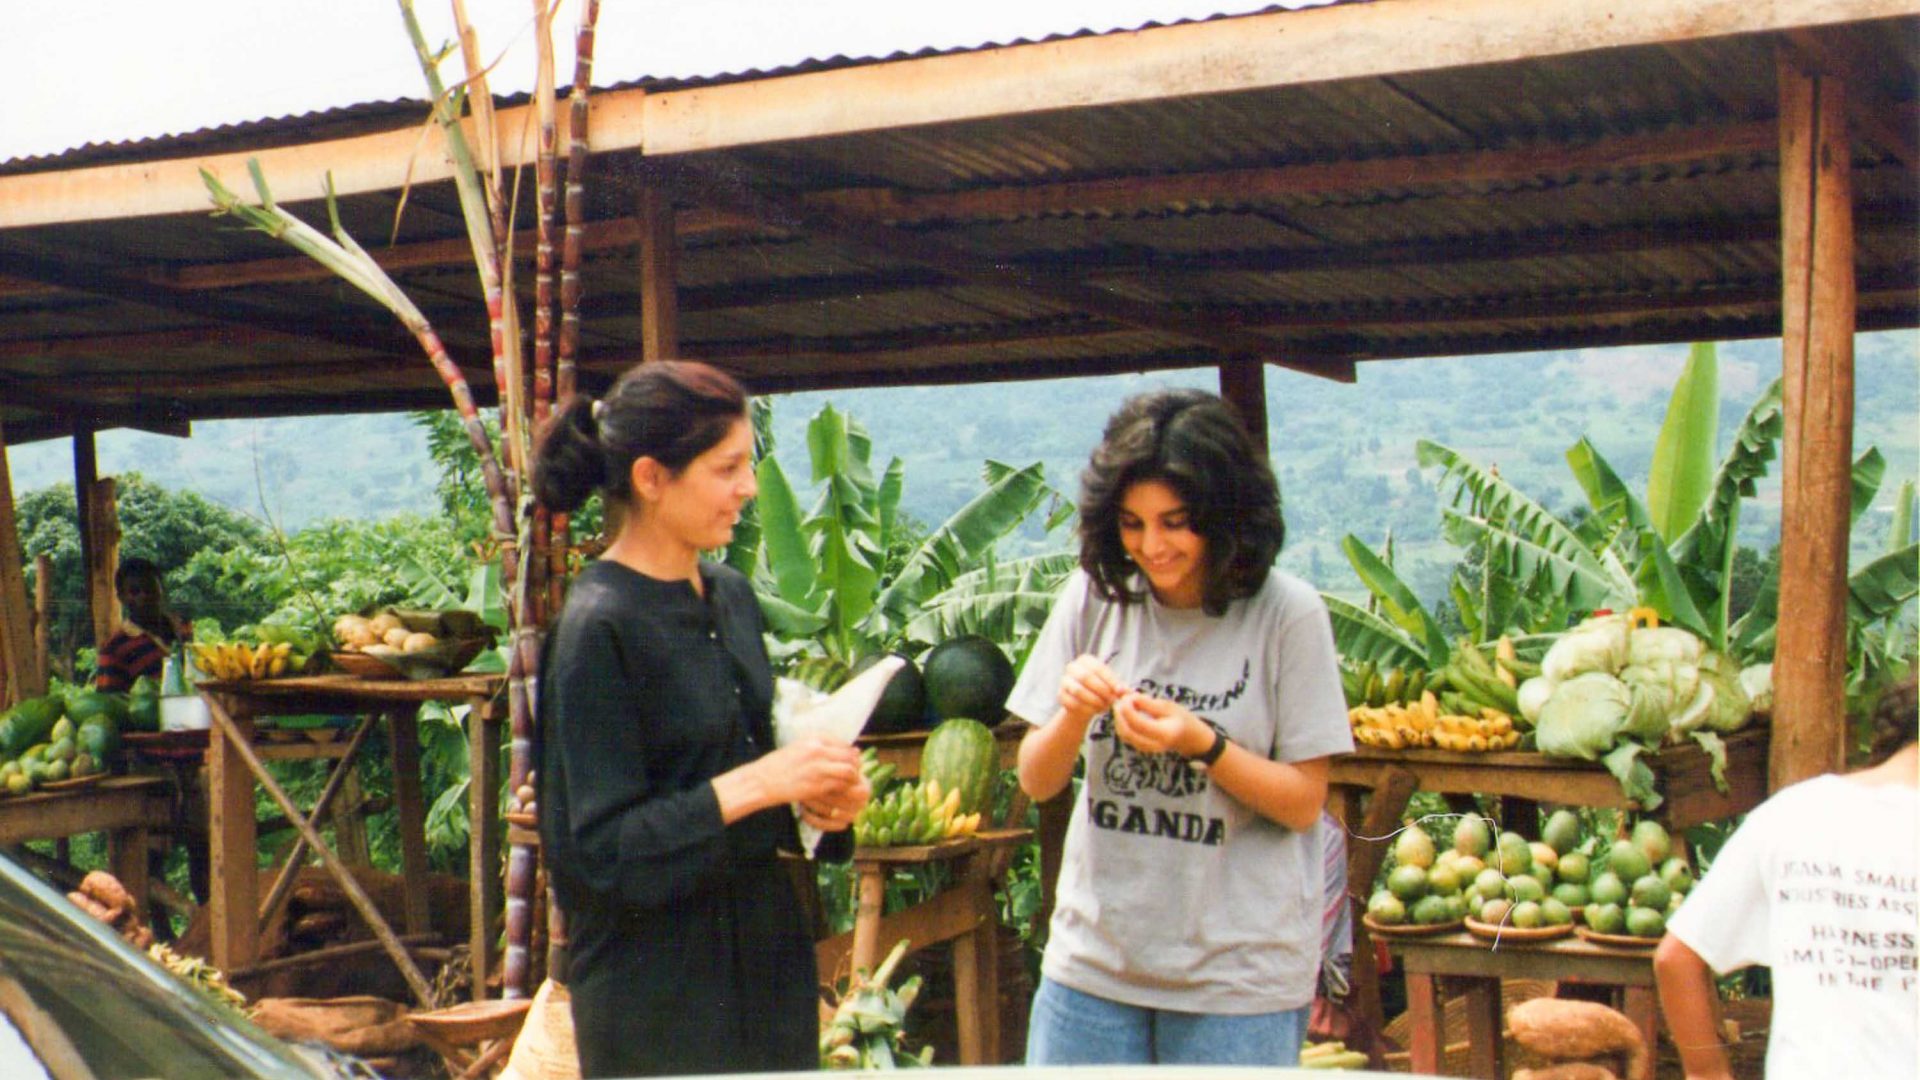 An old photo of two women at a fruit market.